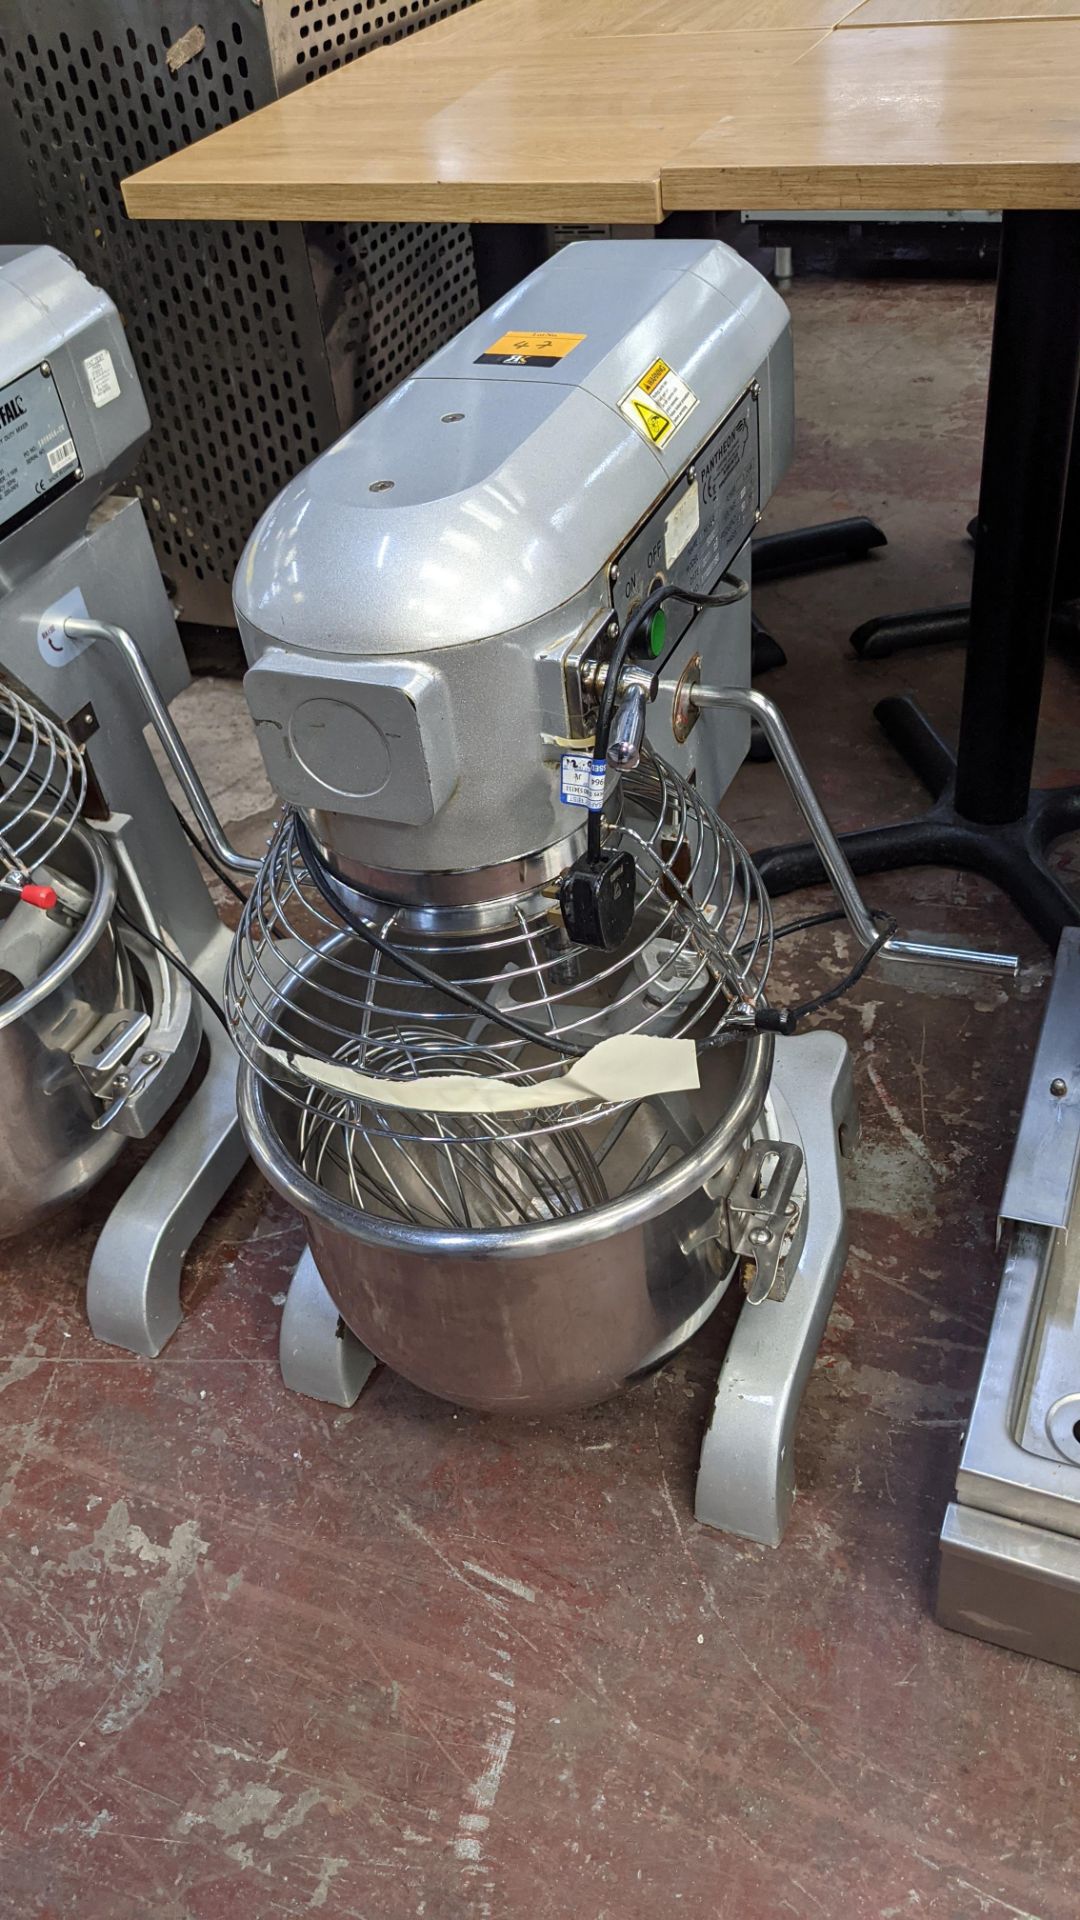 Pantheon model B200 heavy-duty commercial mixer including removable bowl, paddle & whisk - Image 7 of 8